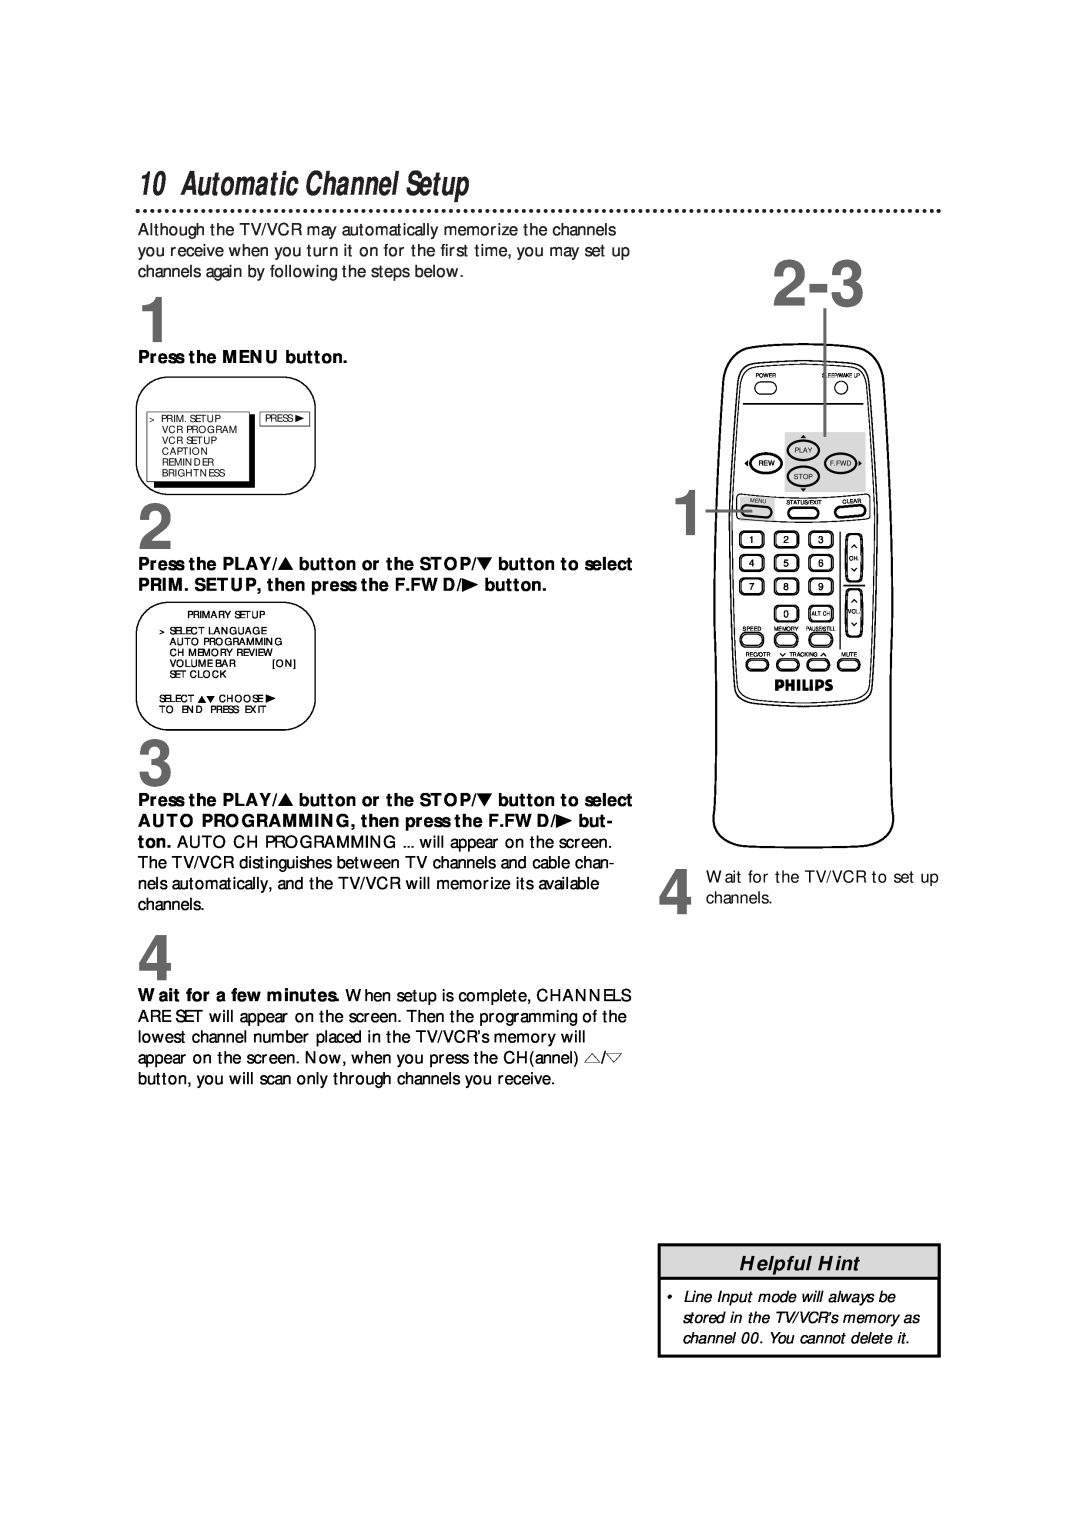 Philips CCB 192AT, CCB 132AT, CCB190AT owner manual Automatic Channel Setup, Helpful Hint, Wait for the TV/VCR to set up 